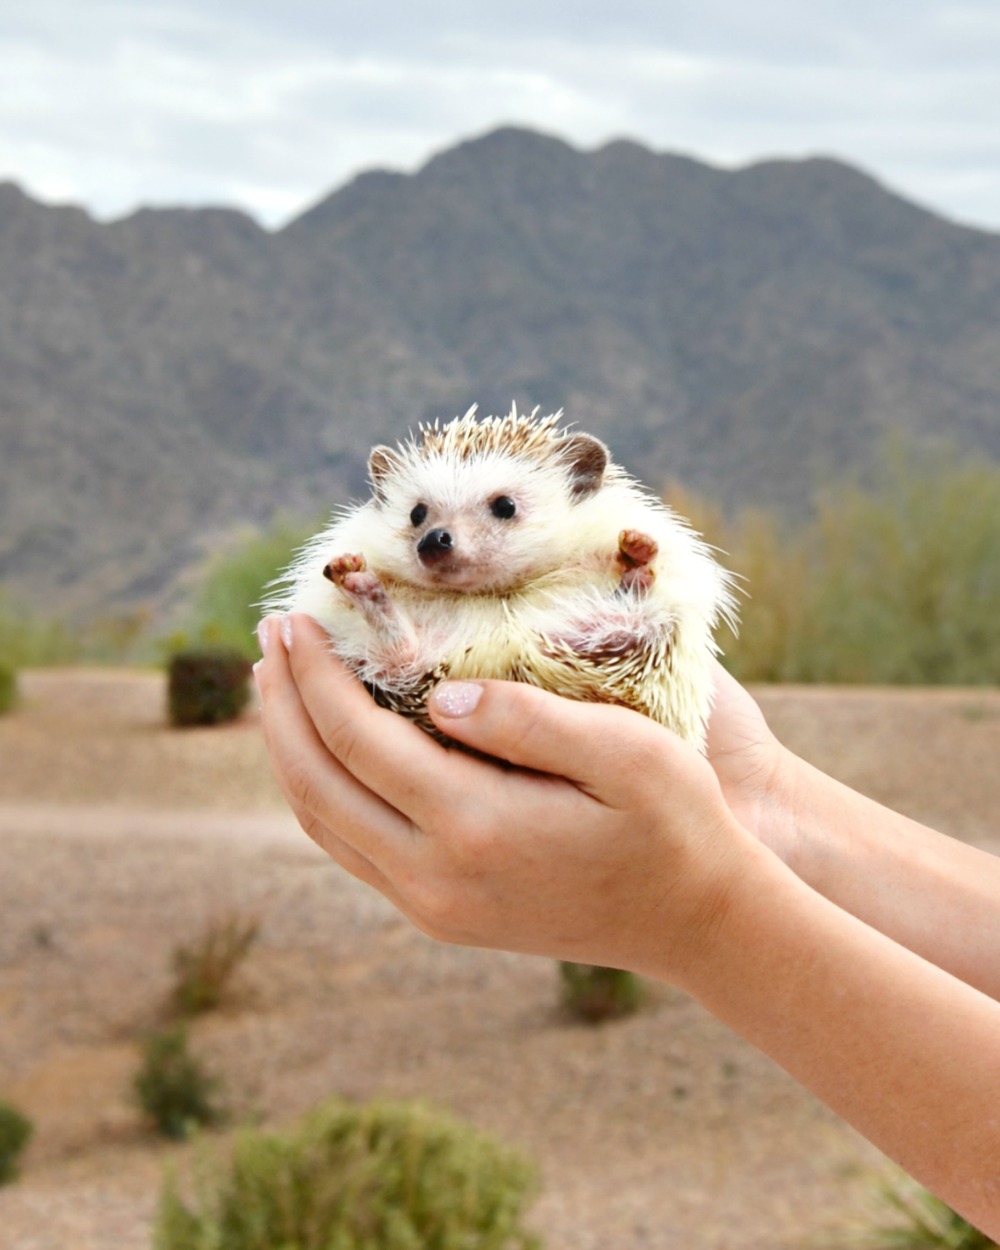 Skittles the hedgehog is funny and playful hedgehog living in Arizona with her nine year old owner.